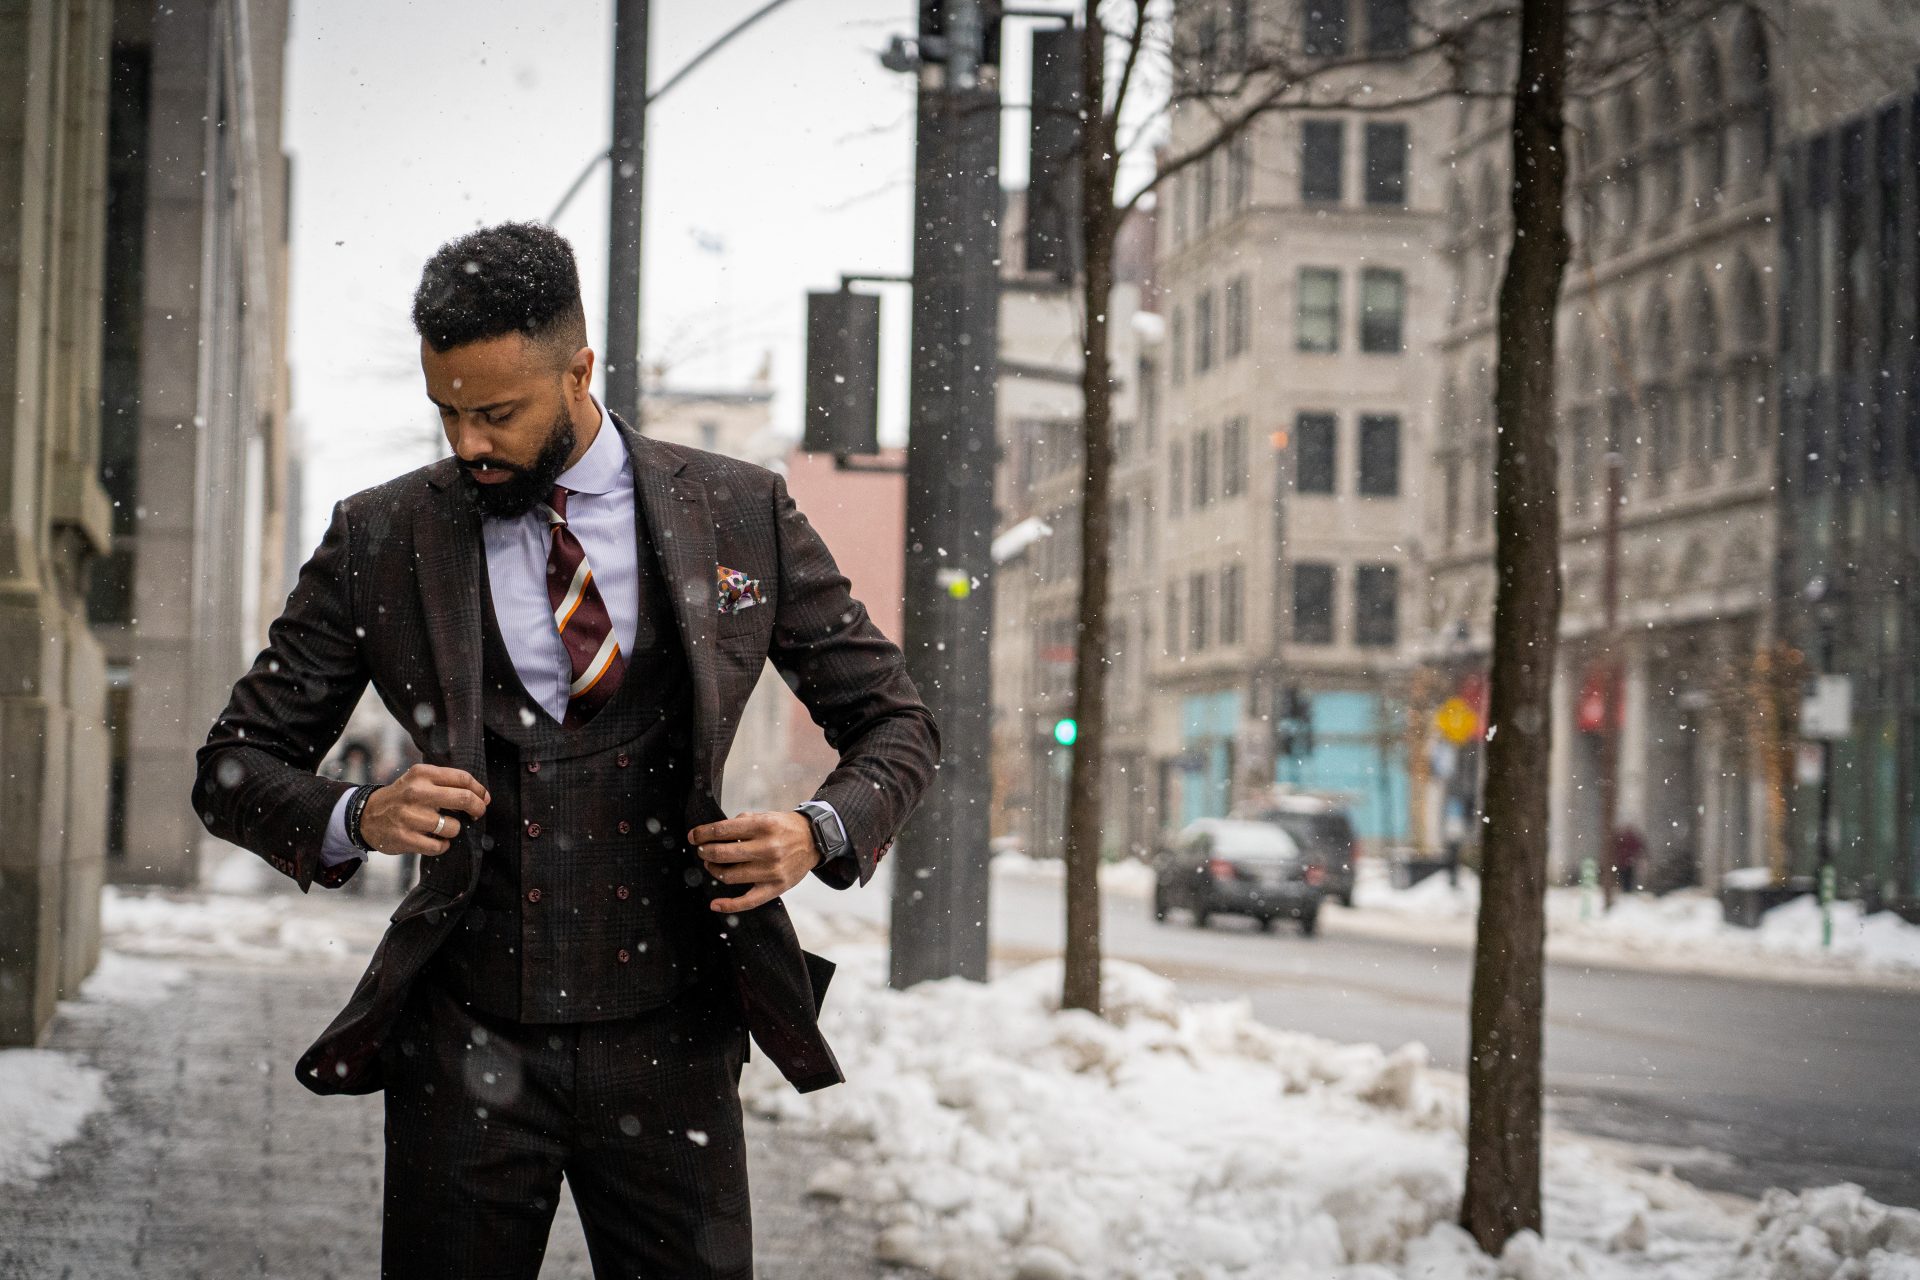 10 Best Holiday Suit Trends for Men